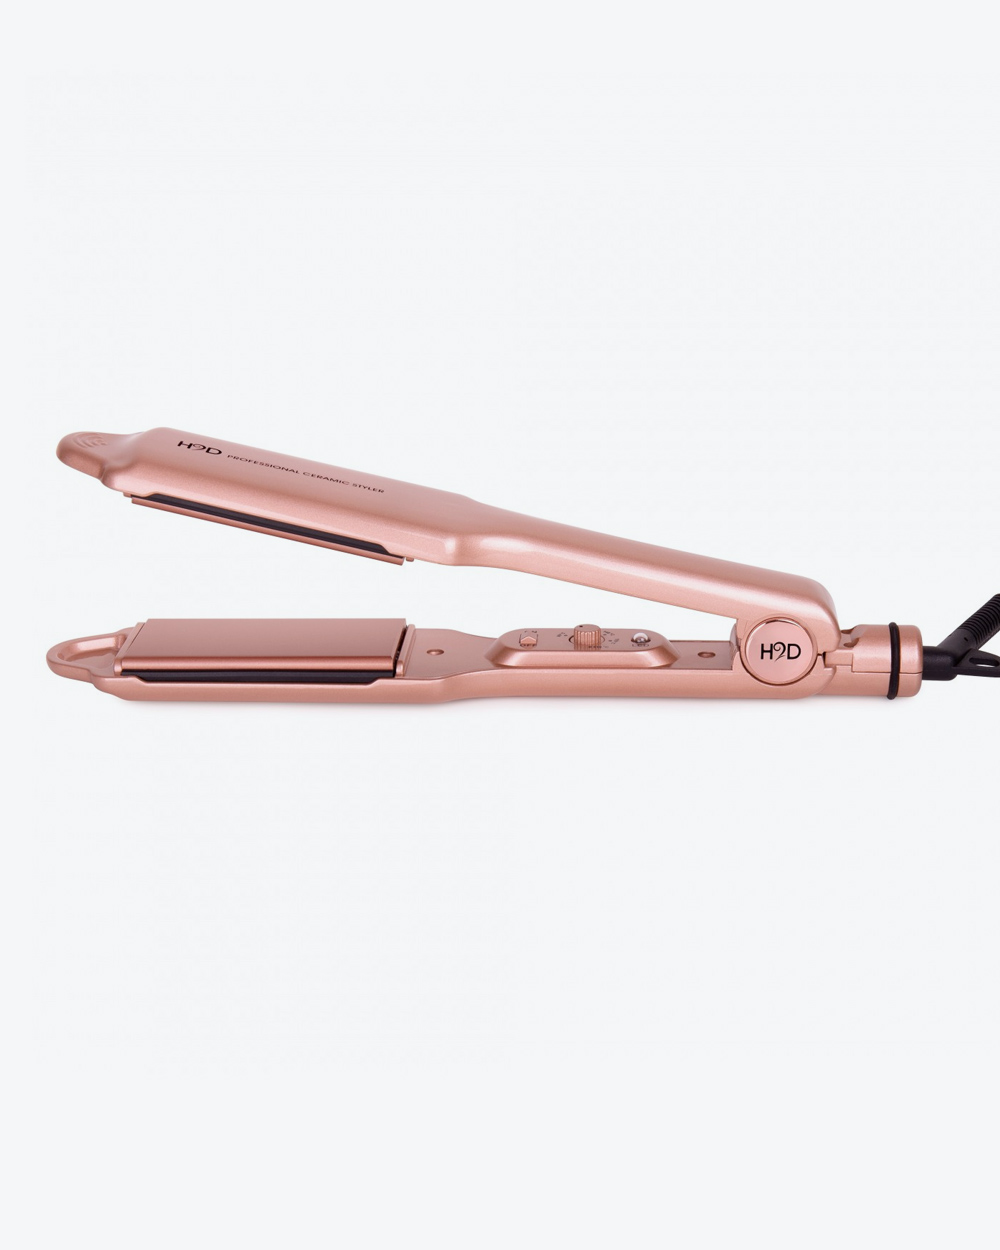 H2D ROSE GOLD WIDE PLATE HAIR STRAIGHTENERS / £